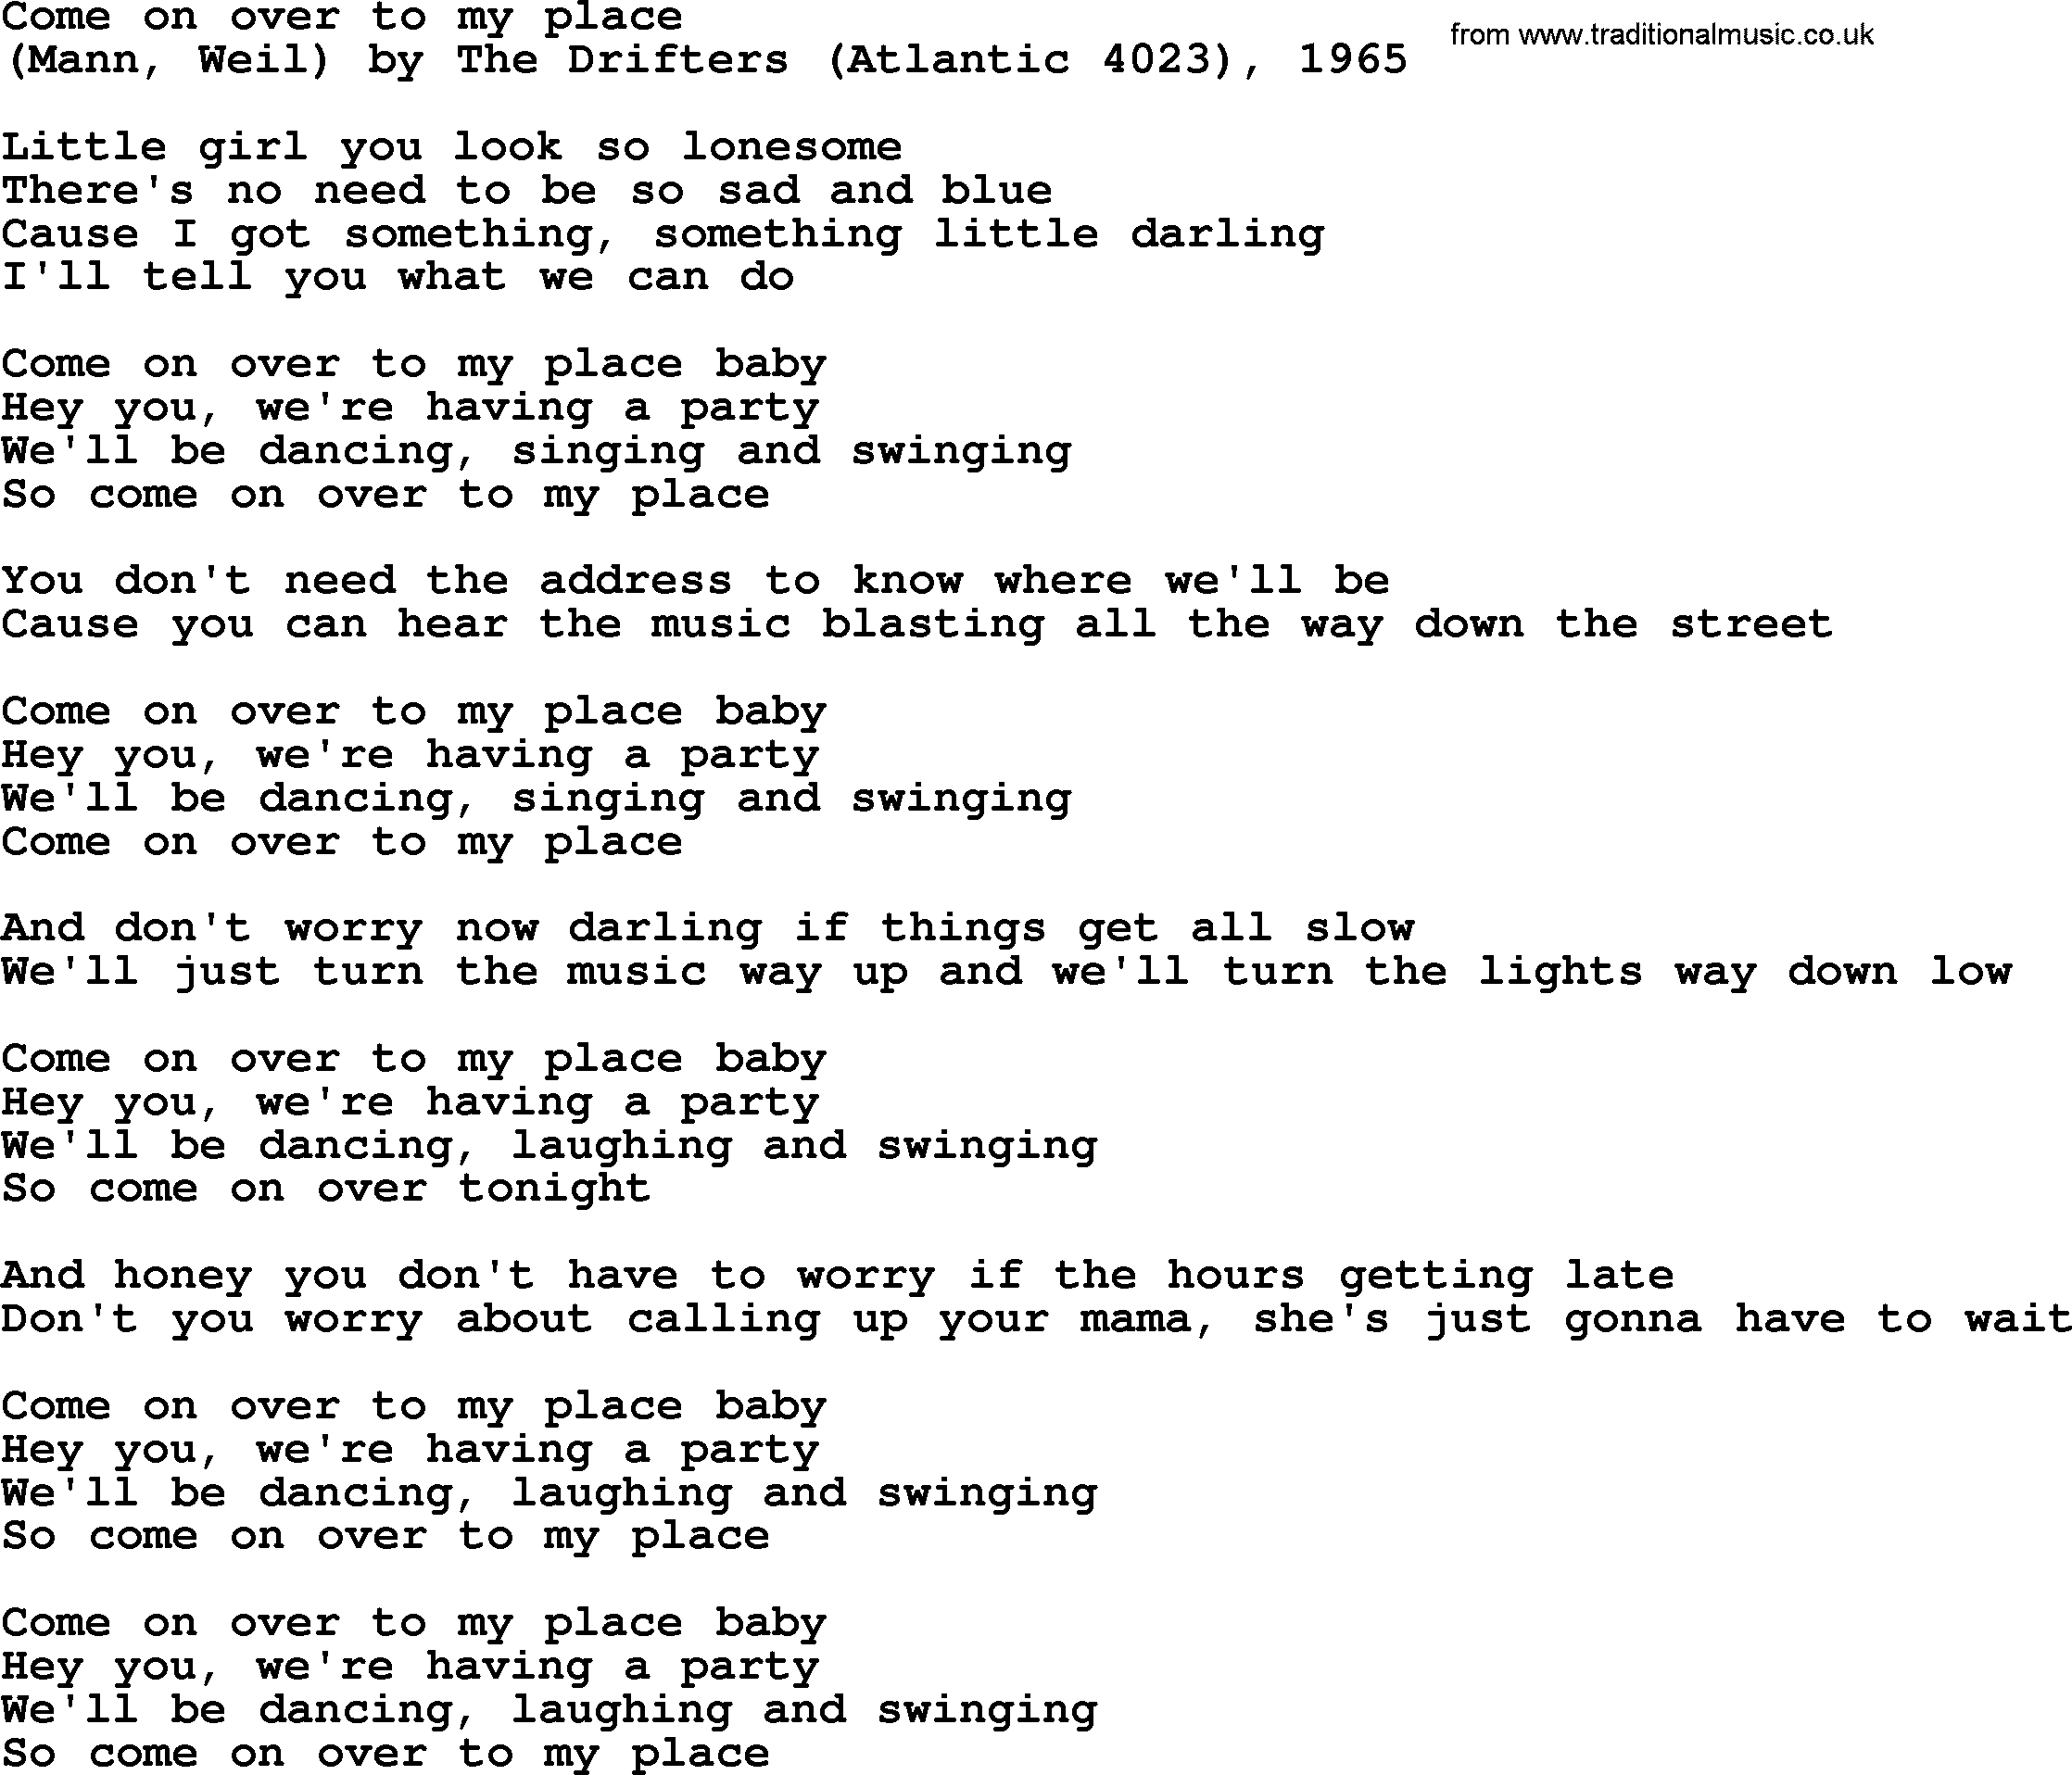 Bruce Springsteen song: Come On Over To My Place lyrics